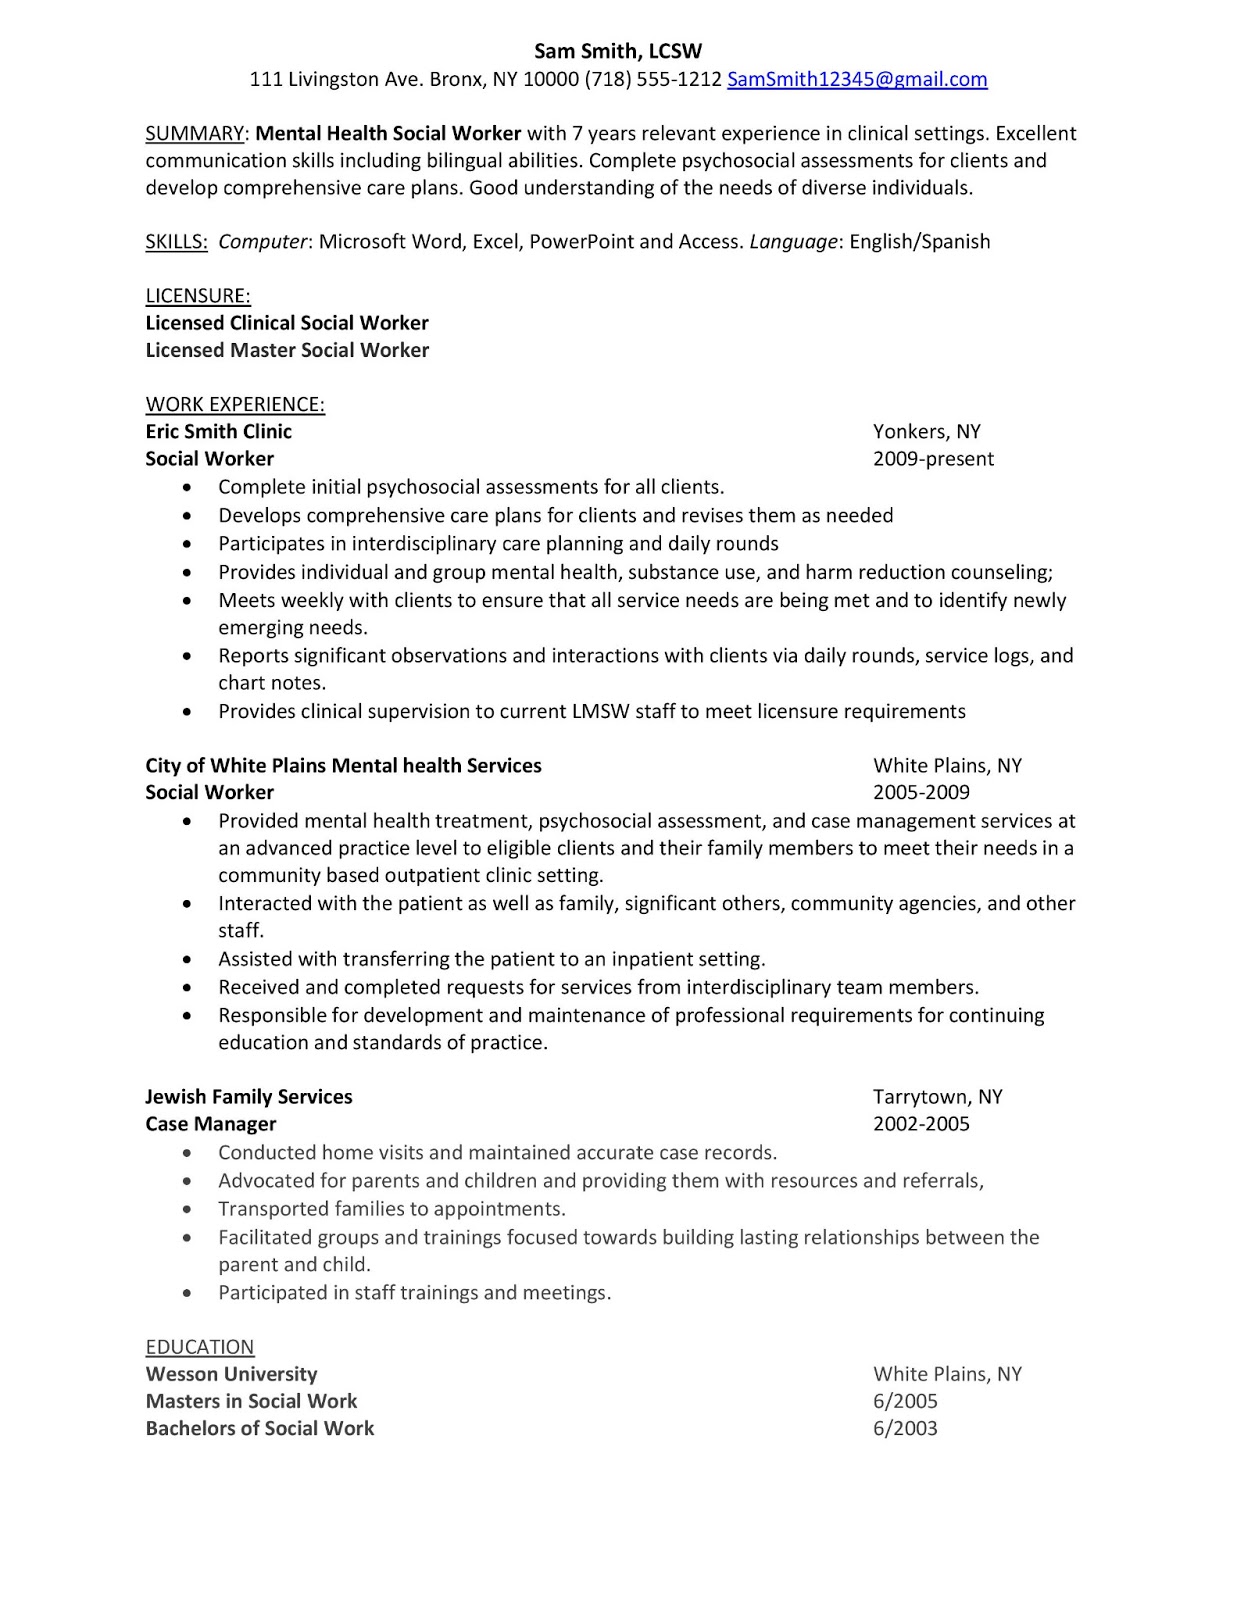 Child support officer resume example